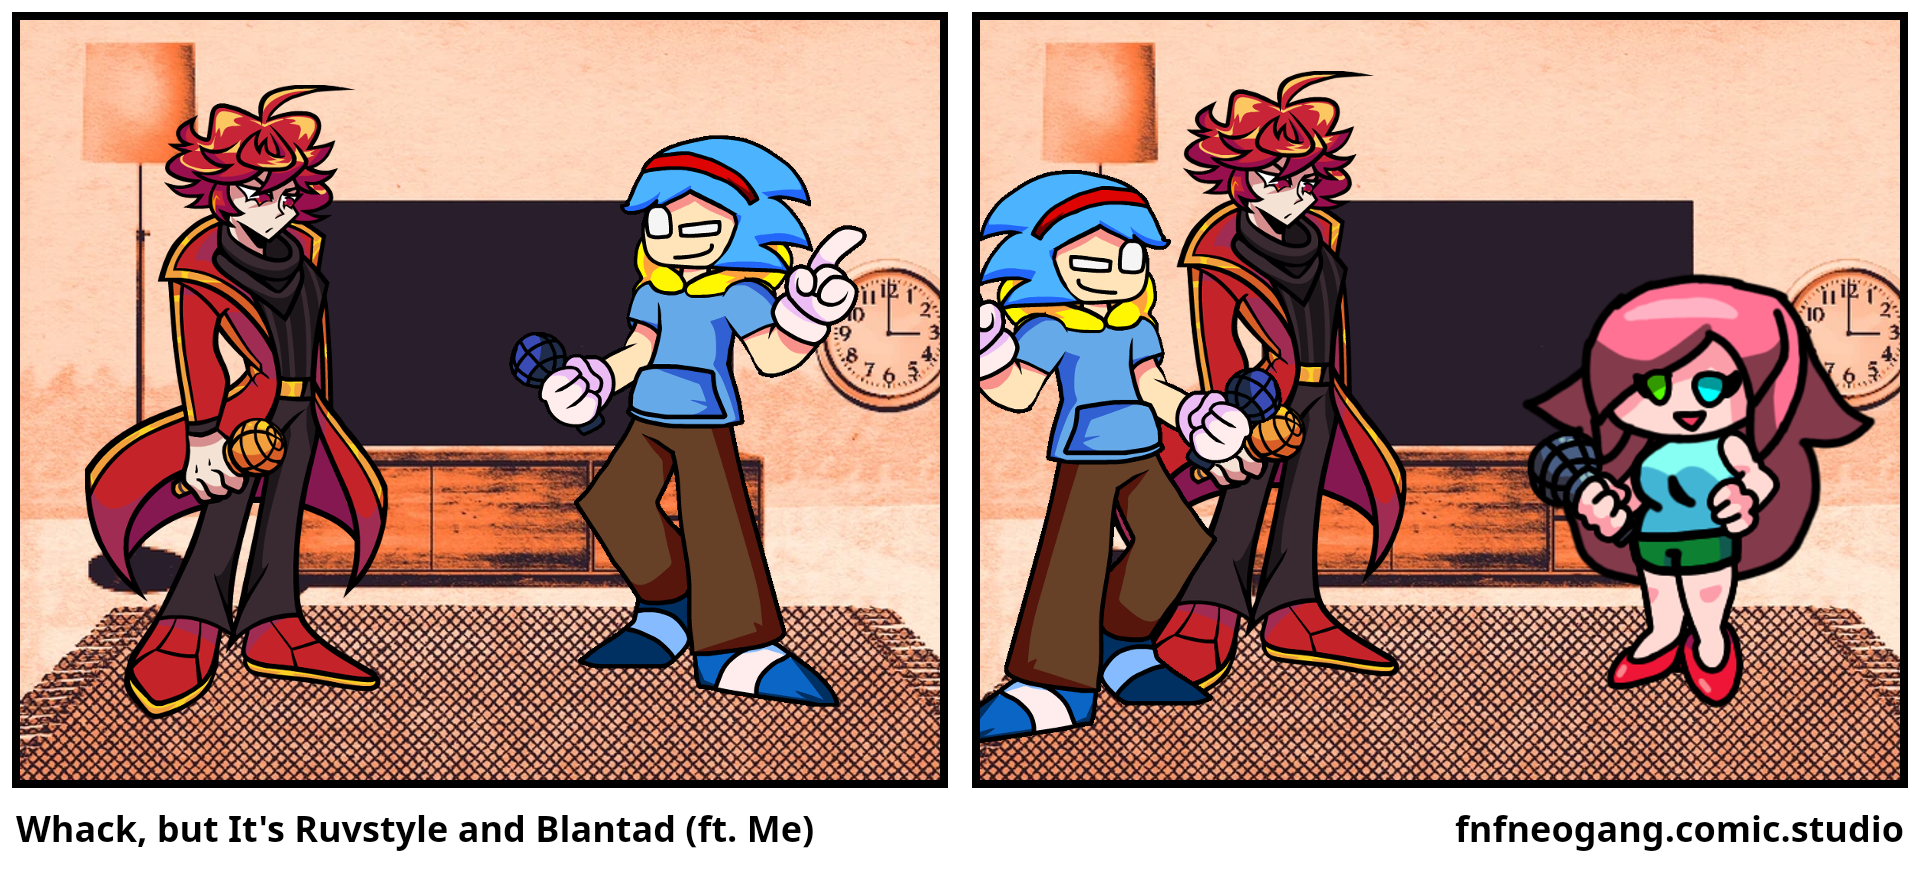 Whack, but It's Ruvstyle and Blantad (ft. Me)